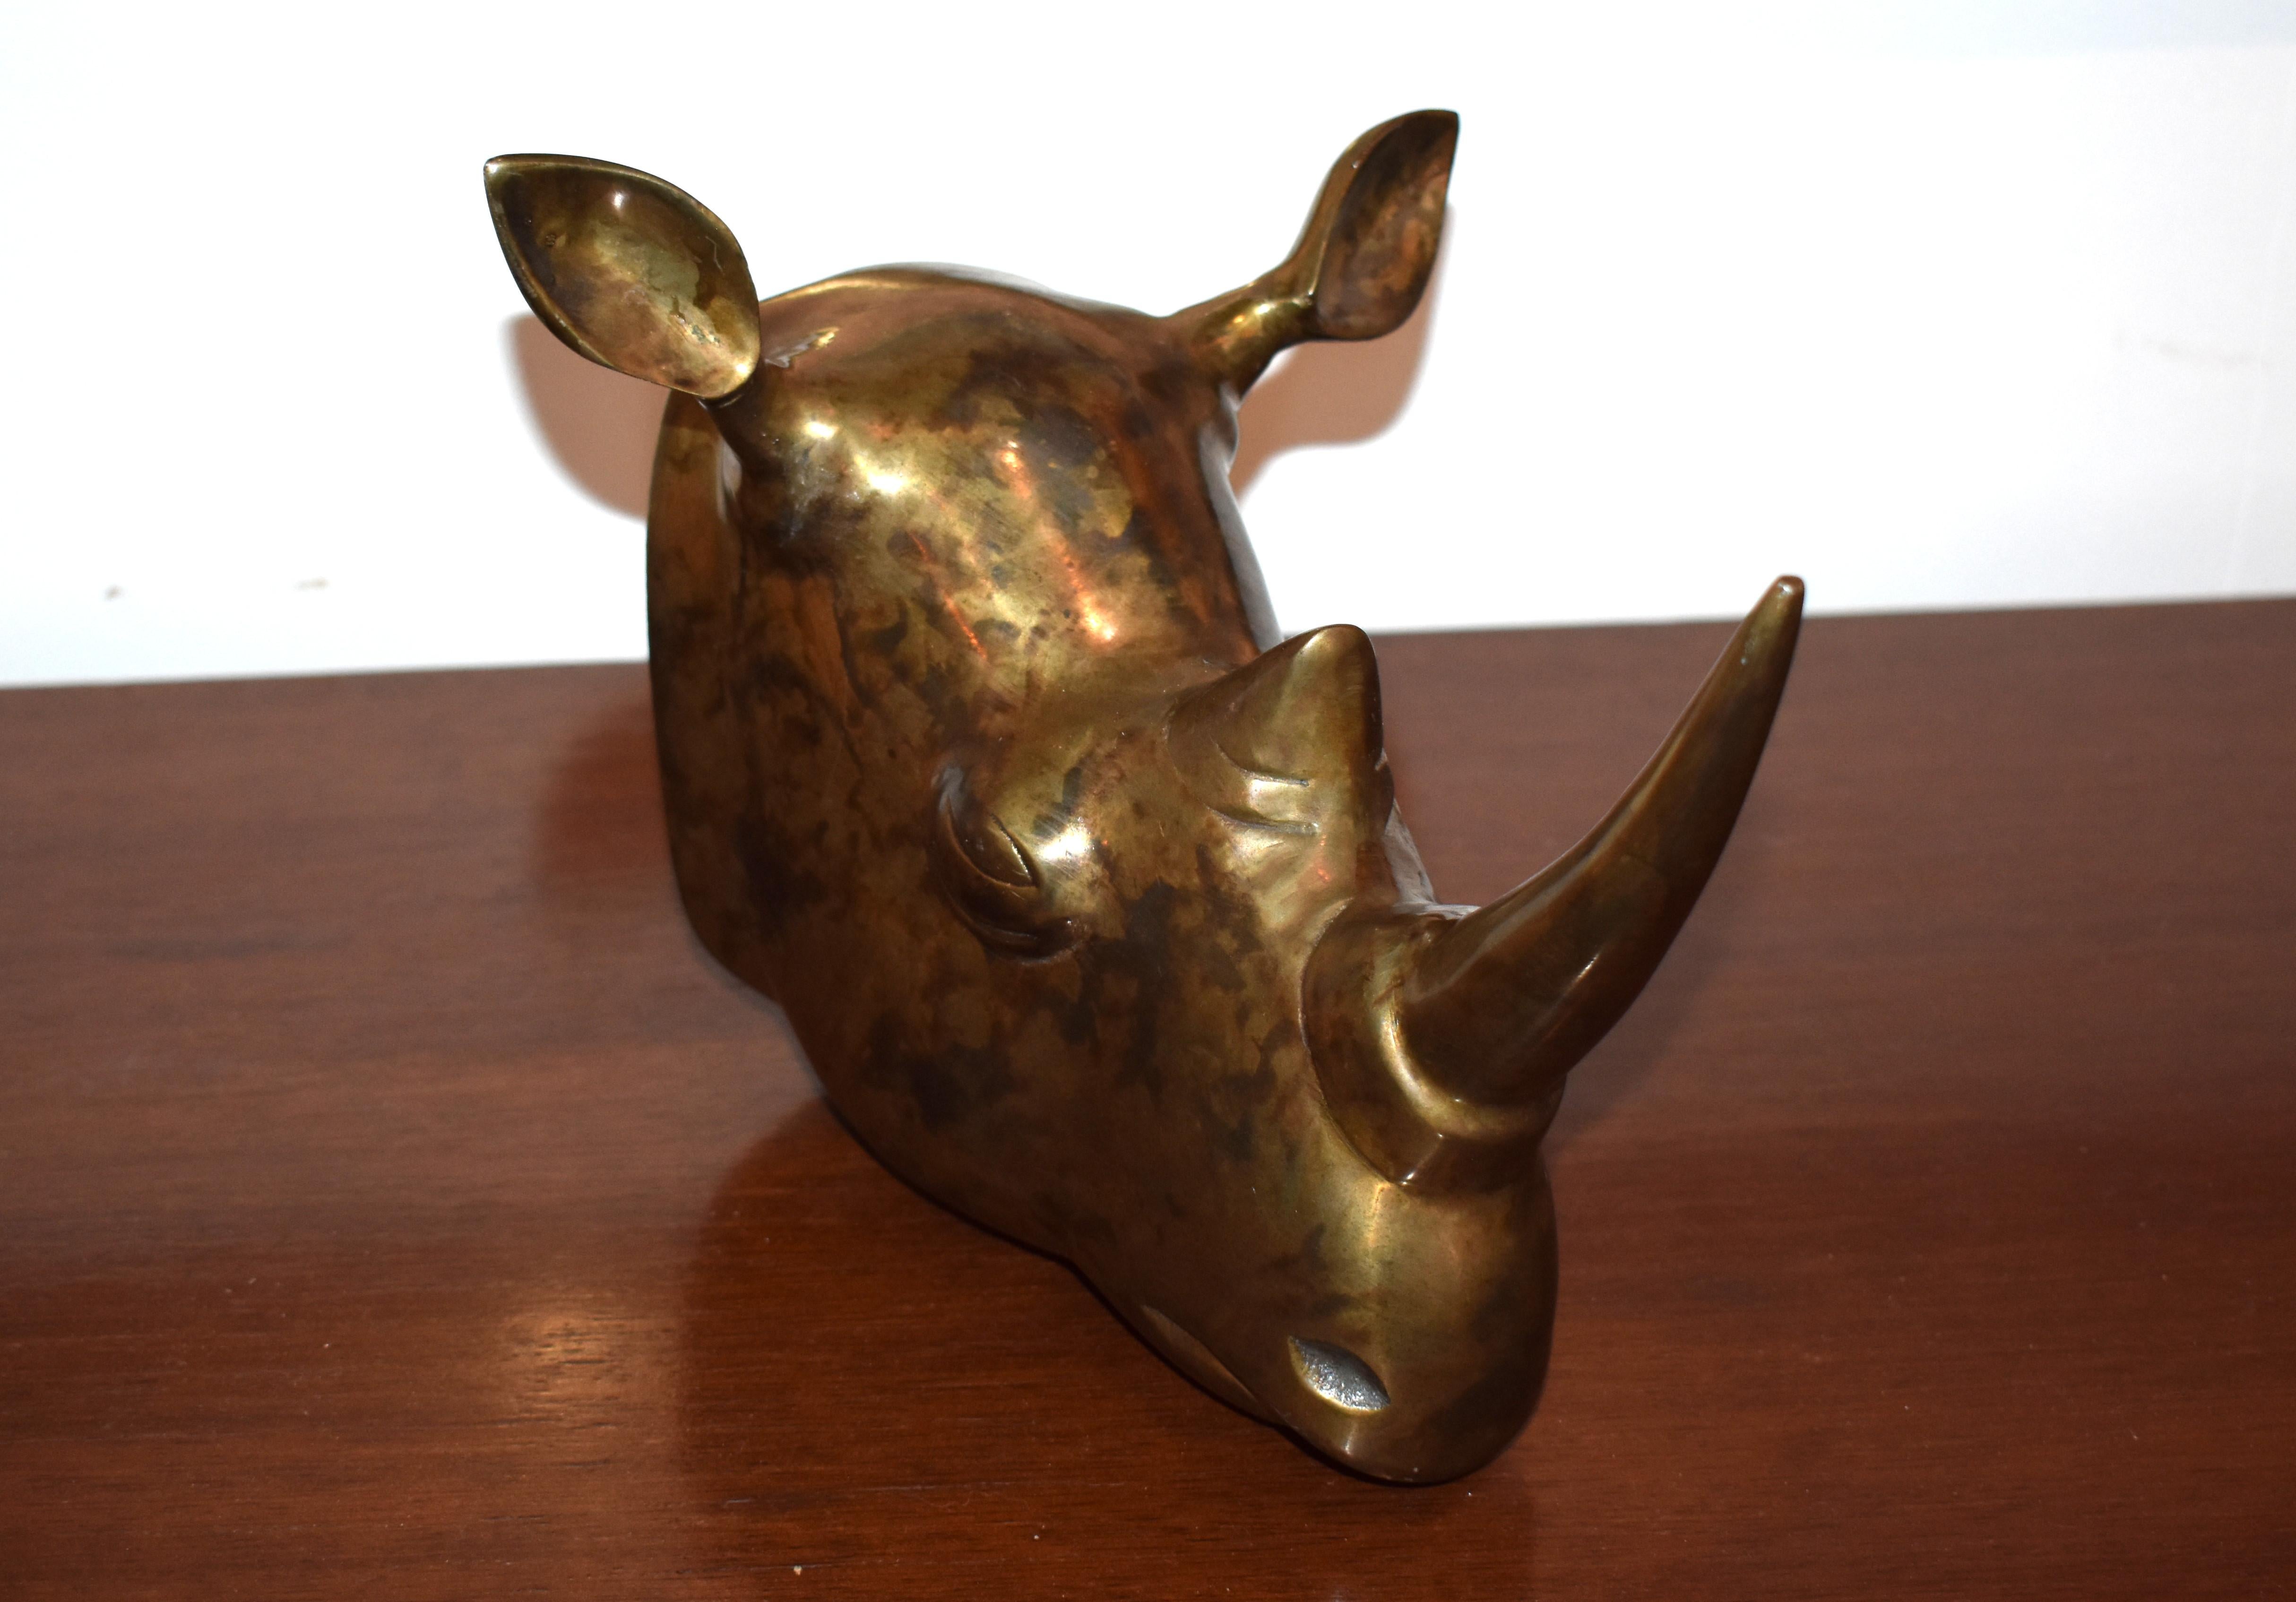 Solid brass rhino head sculpture with a beautiful patina.